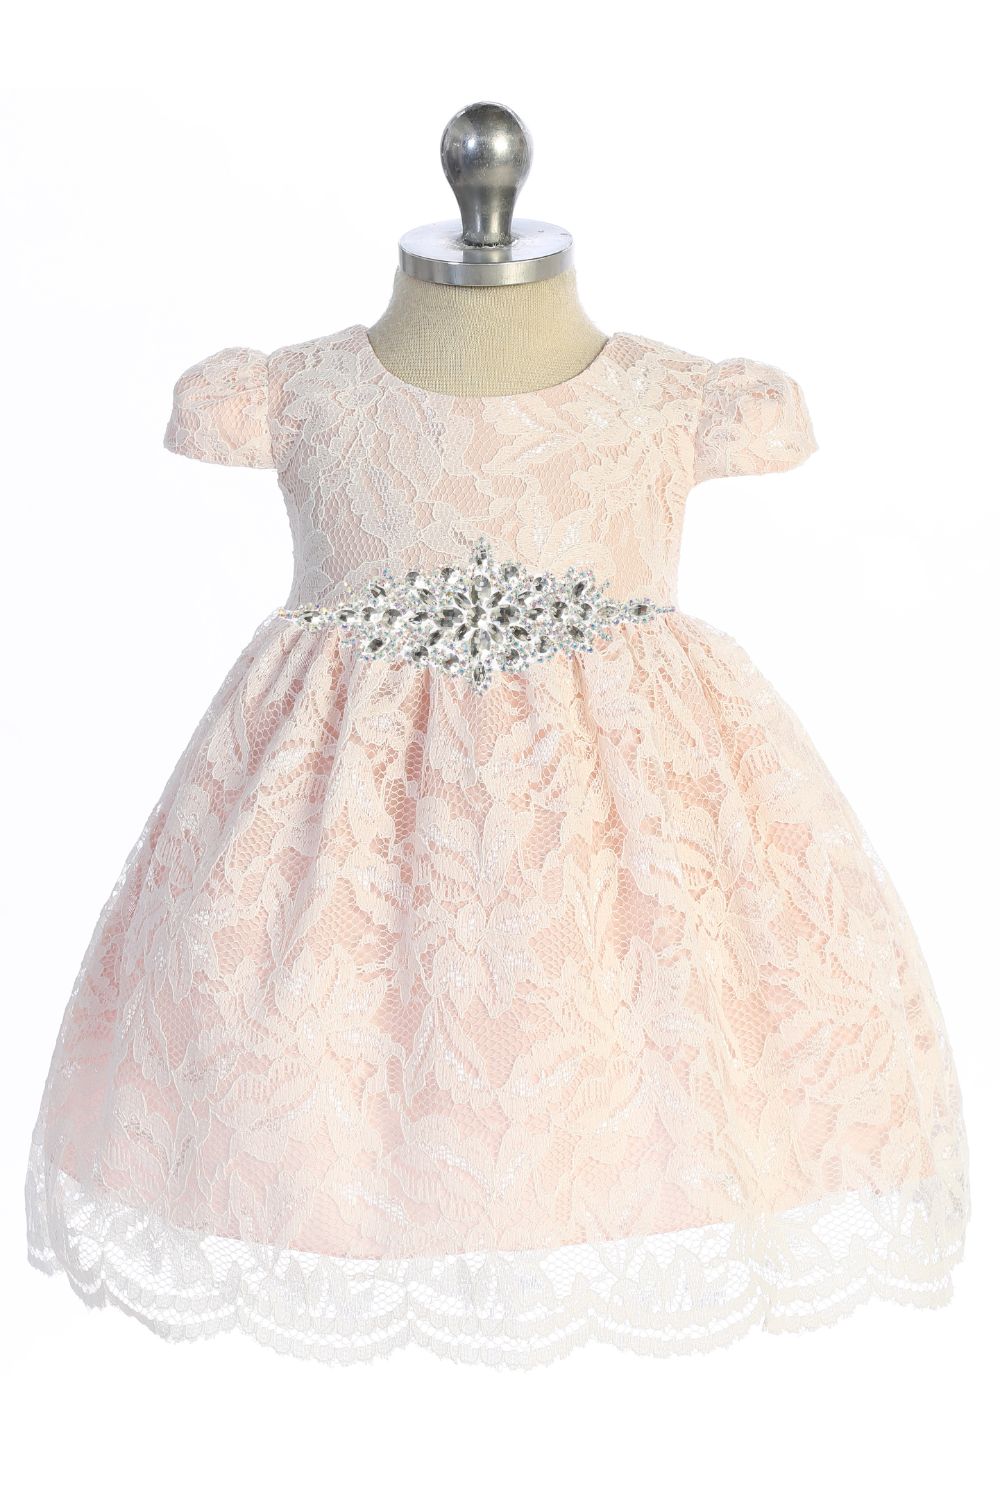 Baby Girl Lace V Back Bow with Diamond Shape Flower Dress - AS532-D Kids Dream